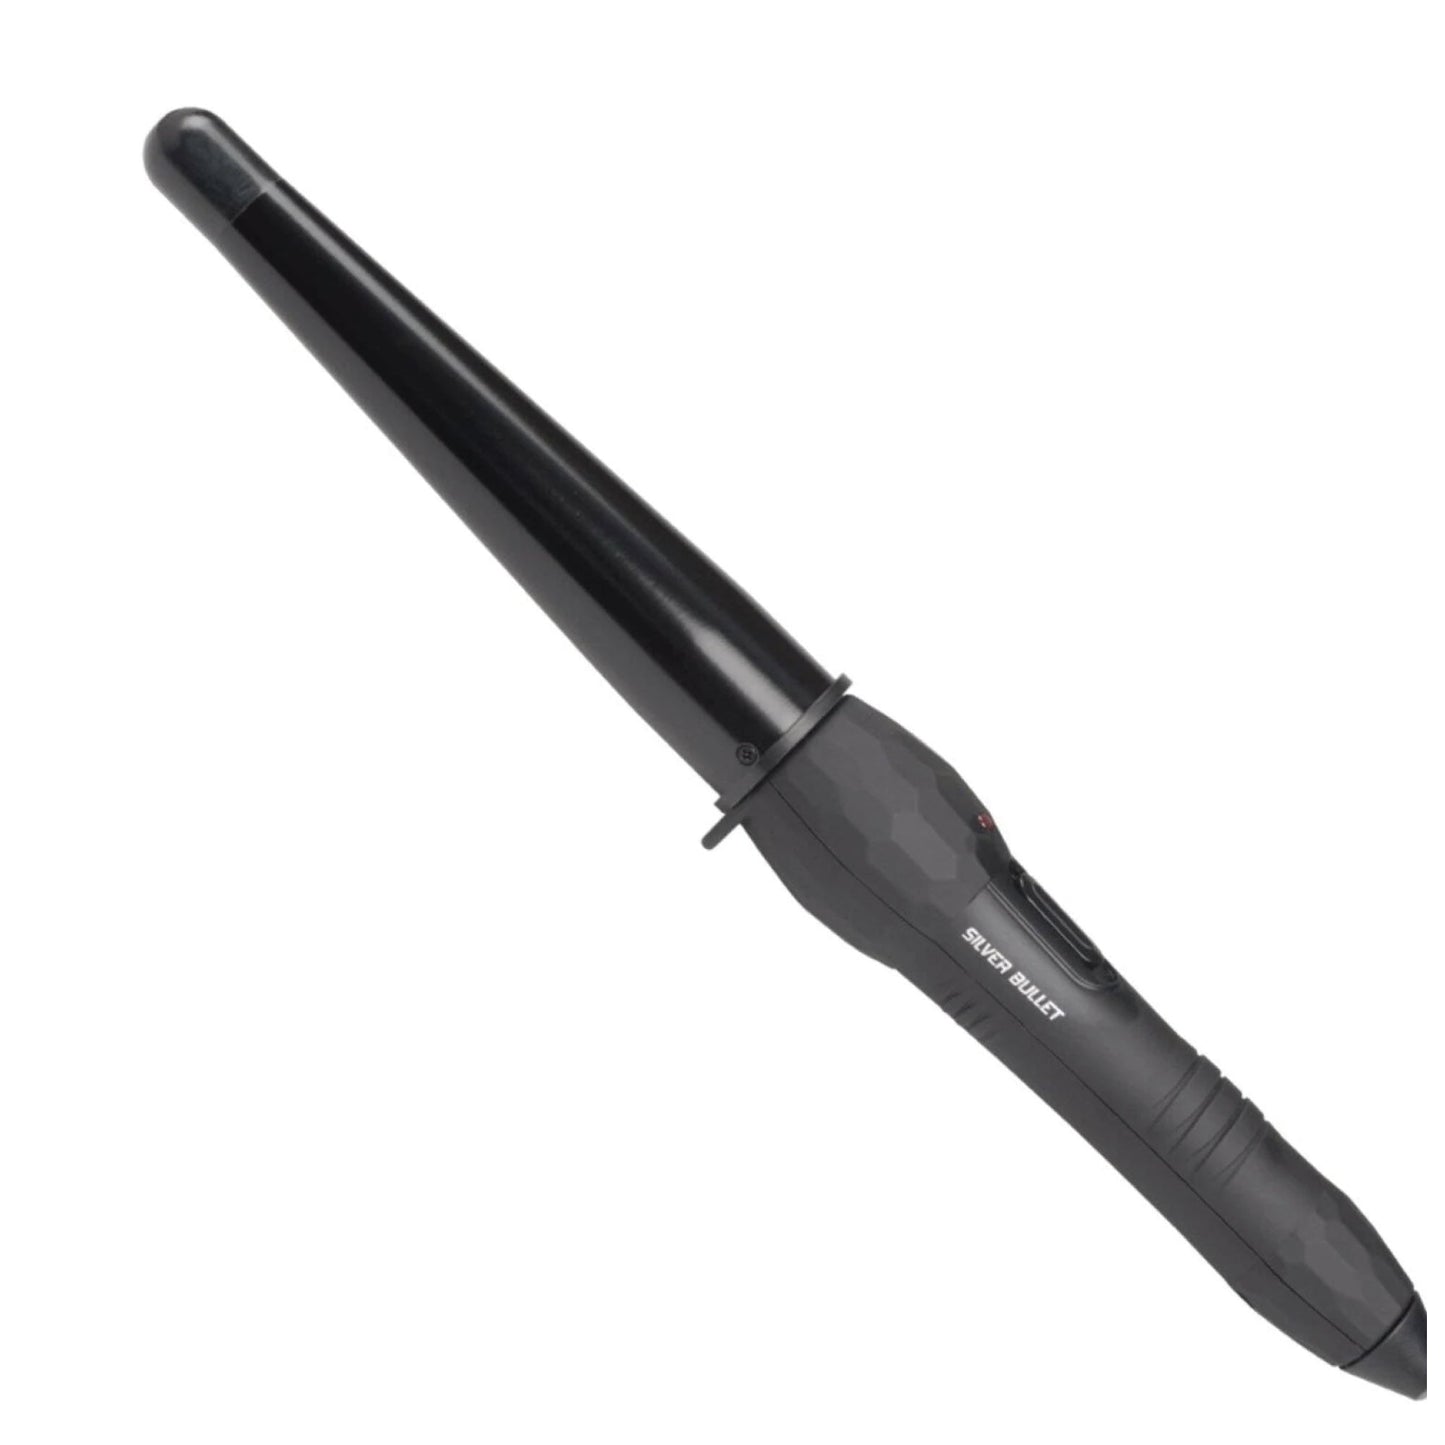 Silver Bullet City Chic Ceramic Conical Iron 19mm-32mm Large Hair Curling Wand